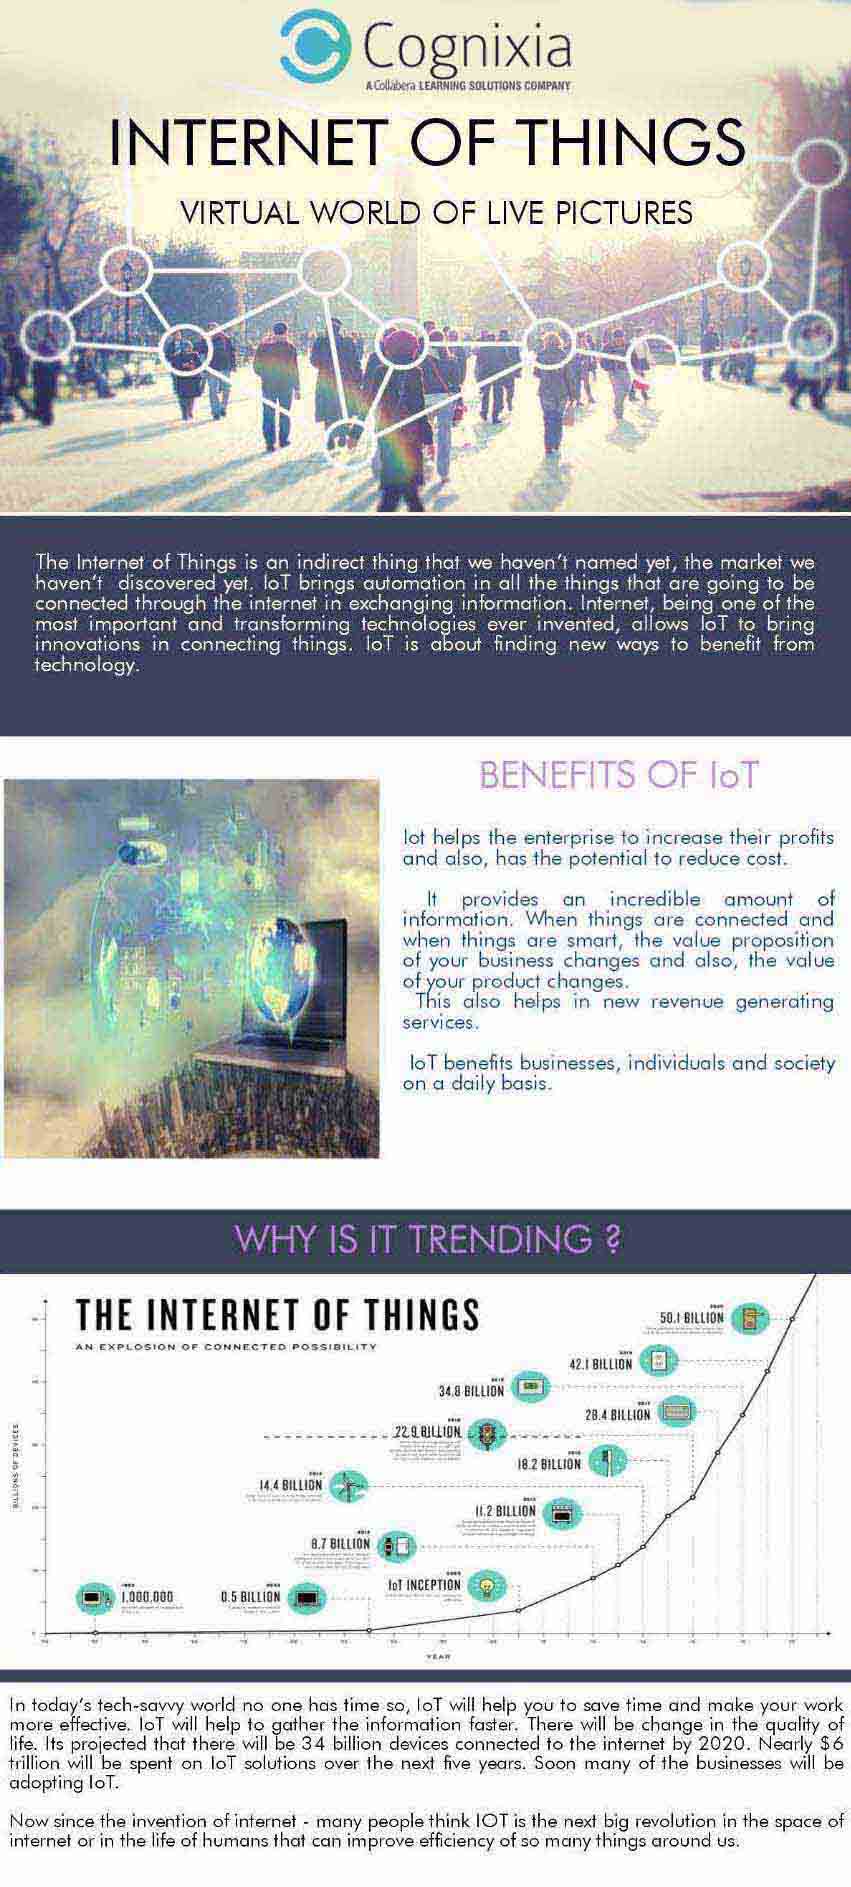 INTERNET OF THINGS – The Way to Work Faster!